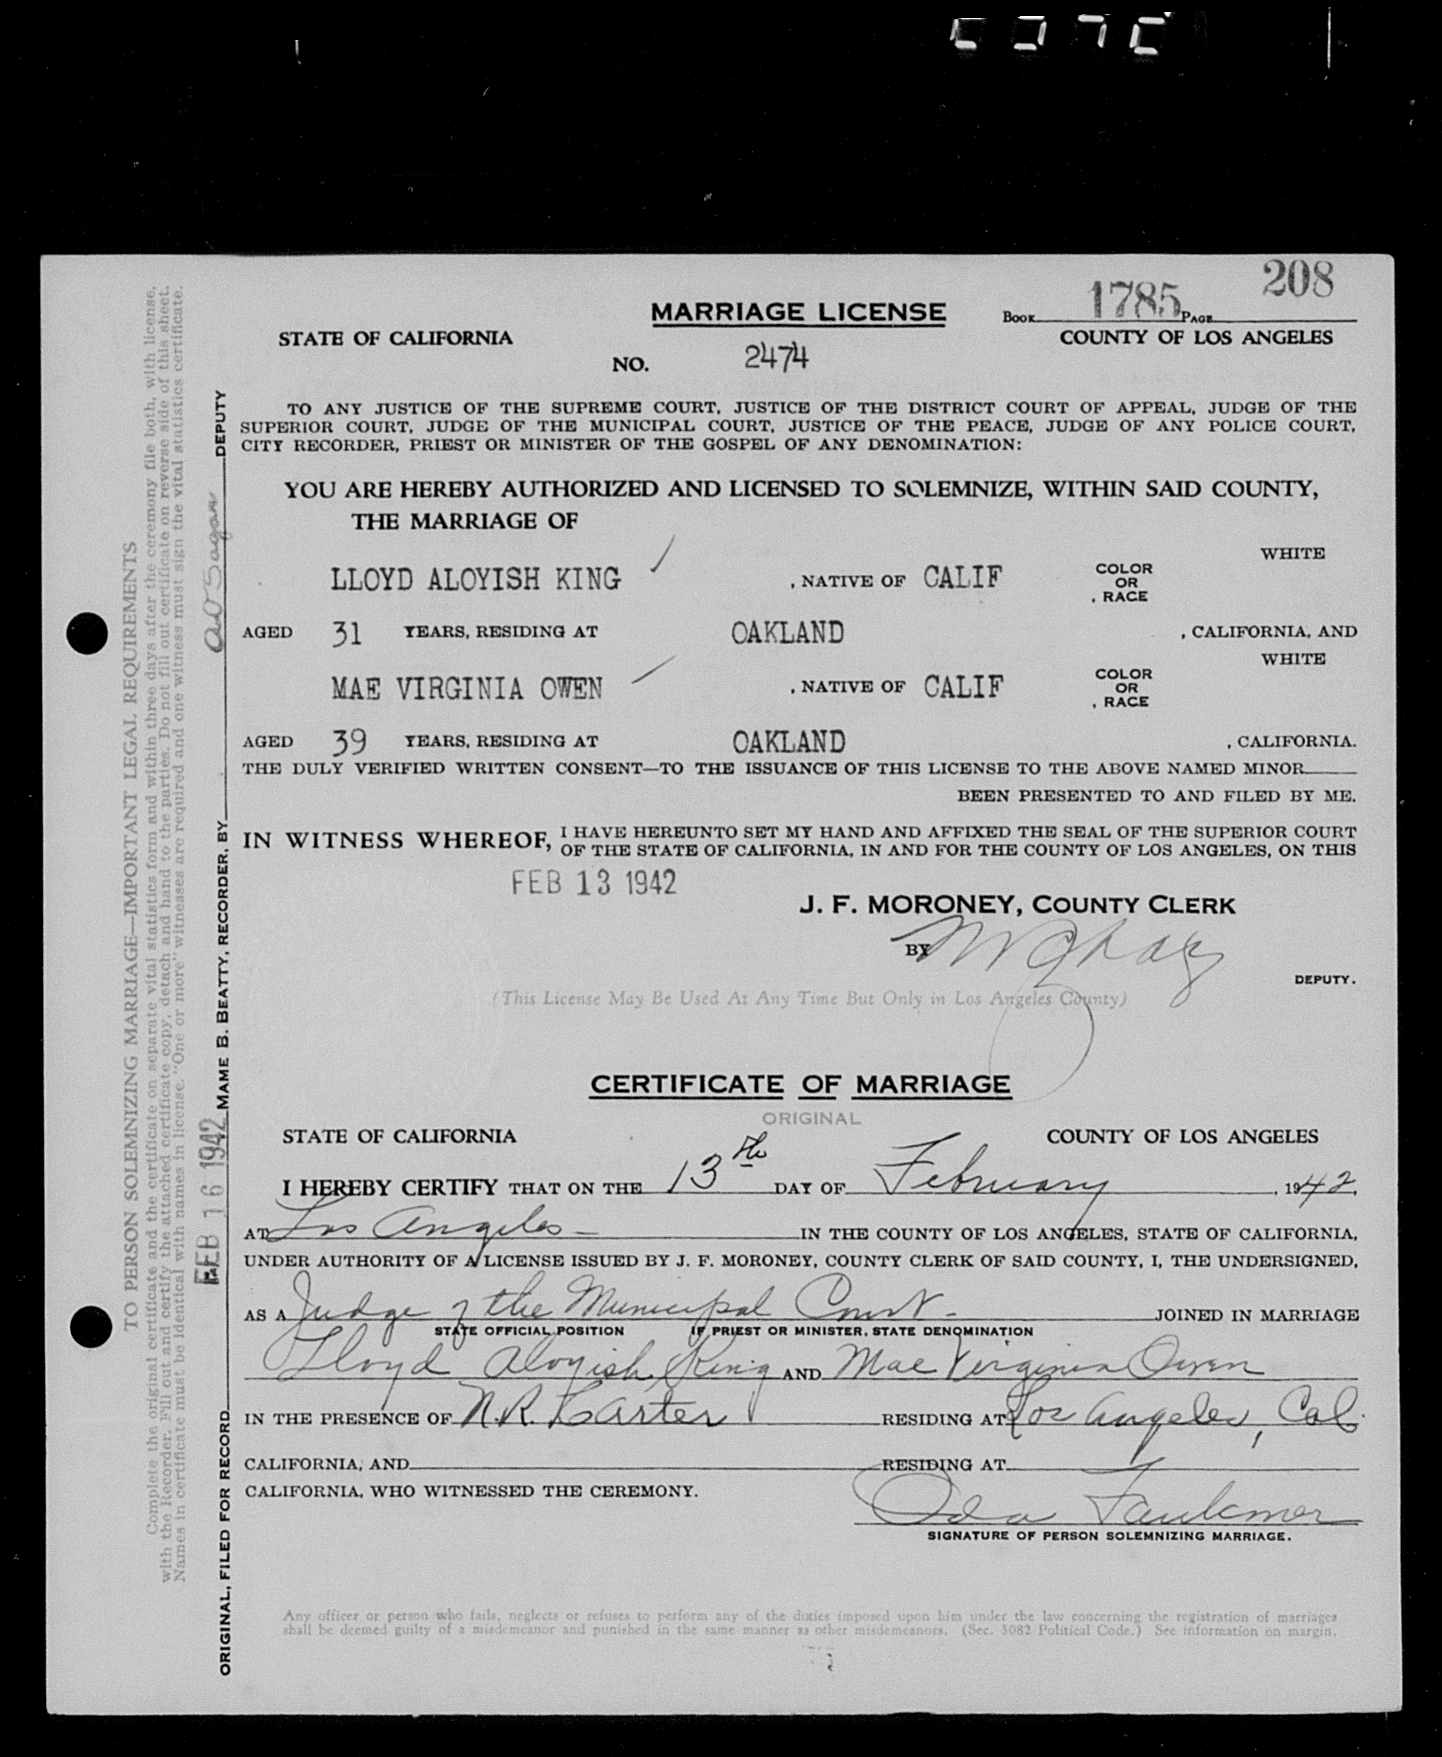 Marriage license and certificate of Lloyd Aloyish King and Mae V. Owen